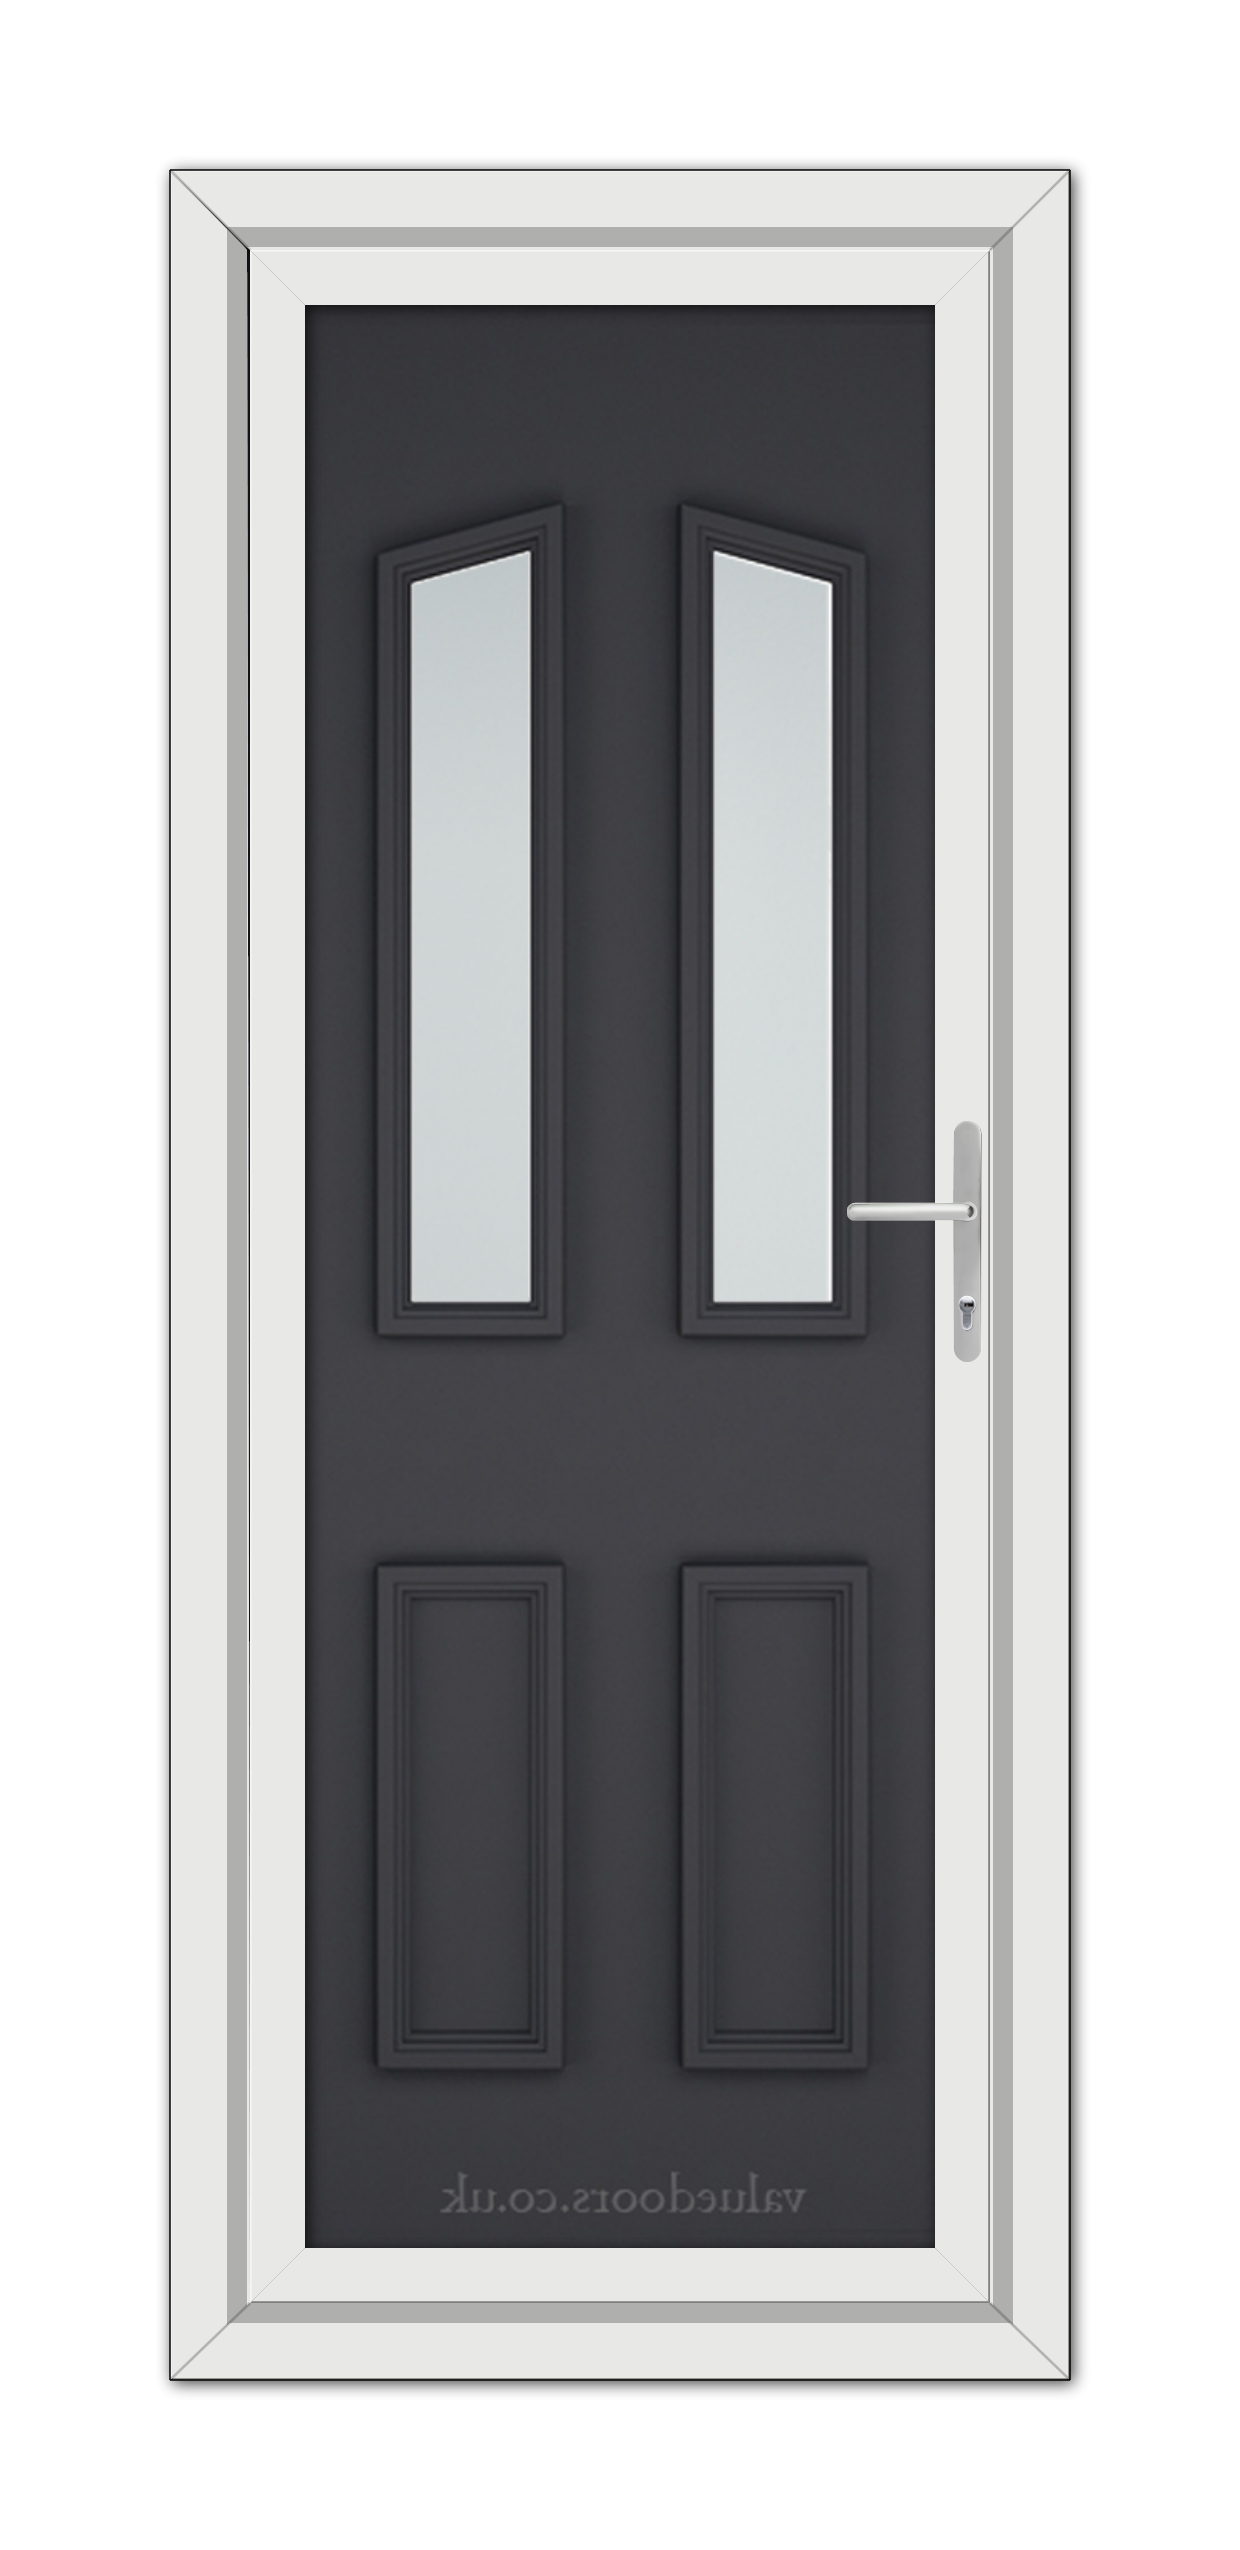 Modern Grey Kensington uPVC Door with two vertical glass panels and a silver handle, framed by a white door frame.